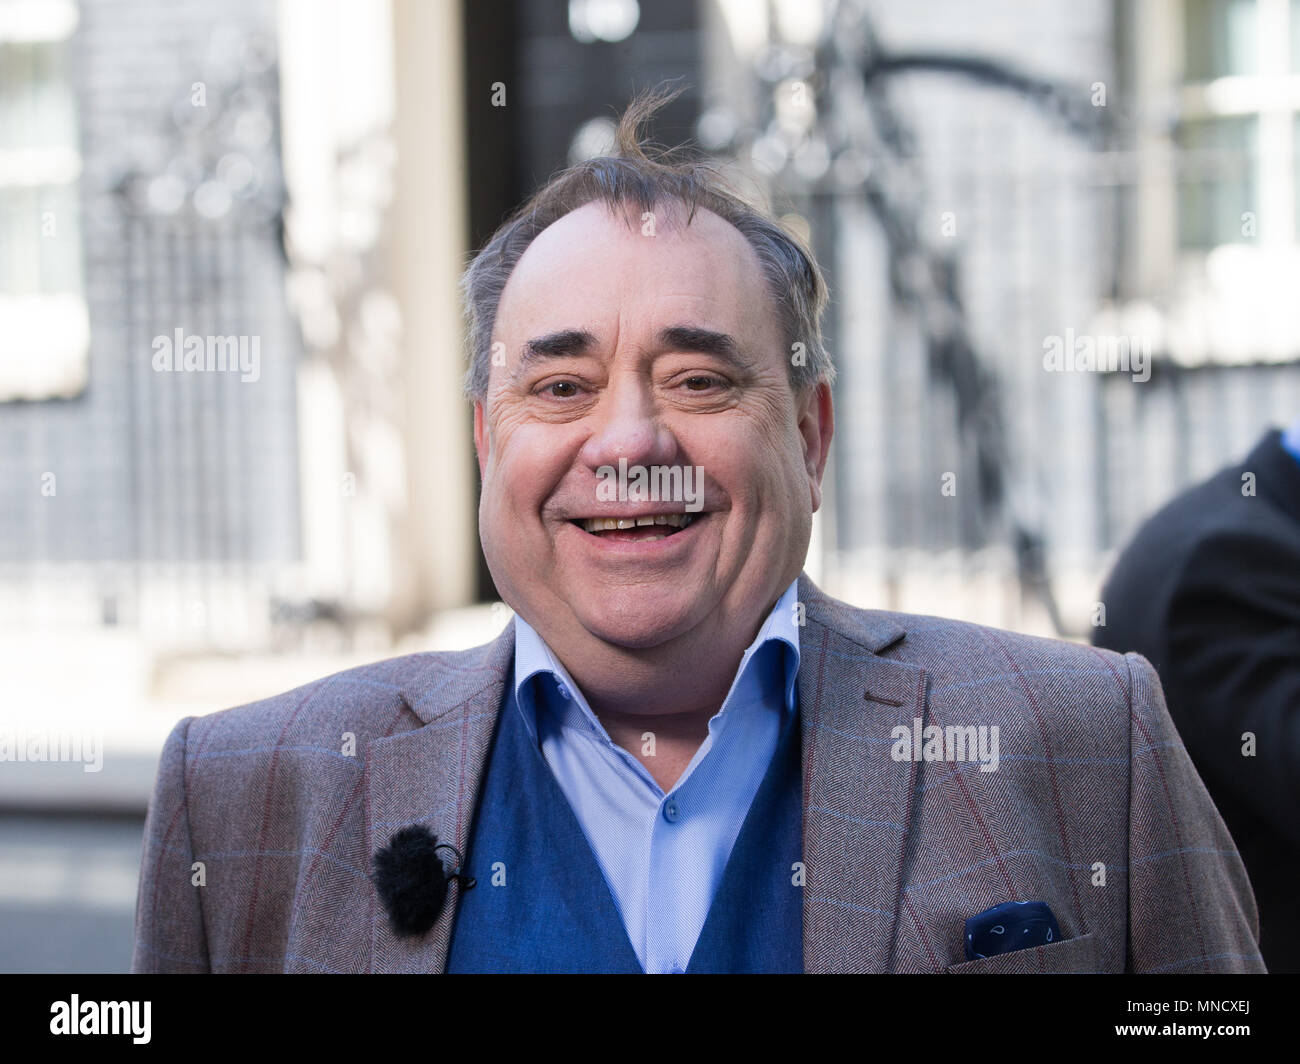 Former First minister of Scotland, Alex Salmond in Downing Street to present his television programme 'The Alex Salmond Show'. Stock Photo